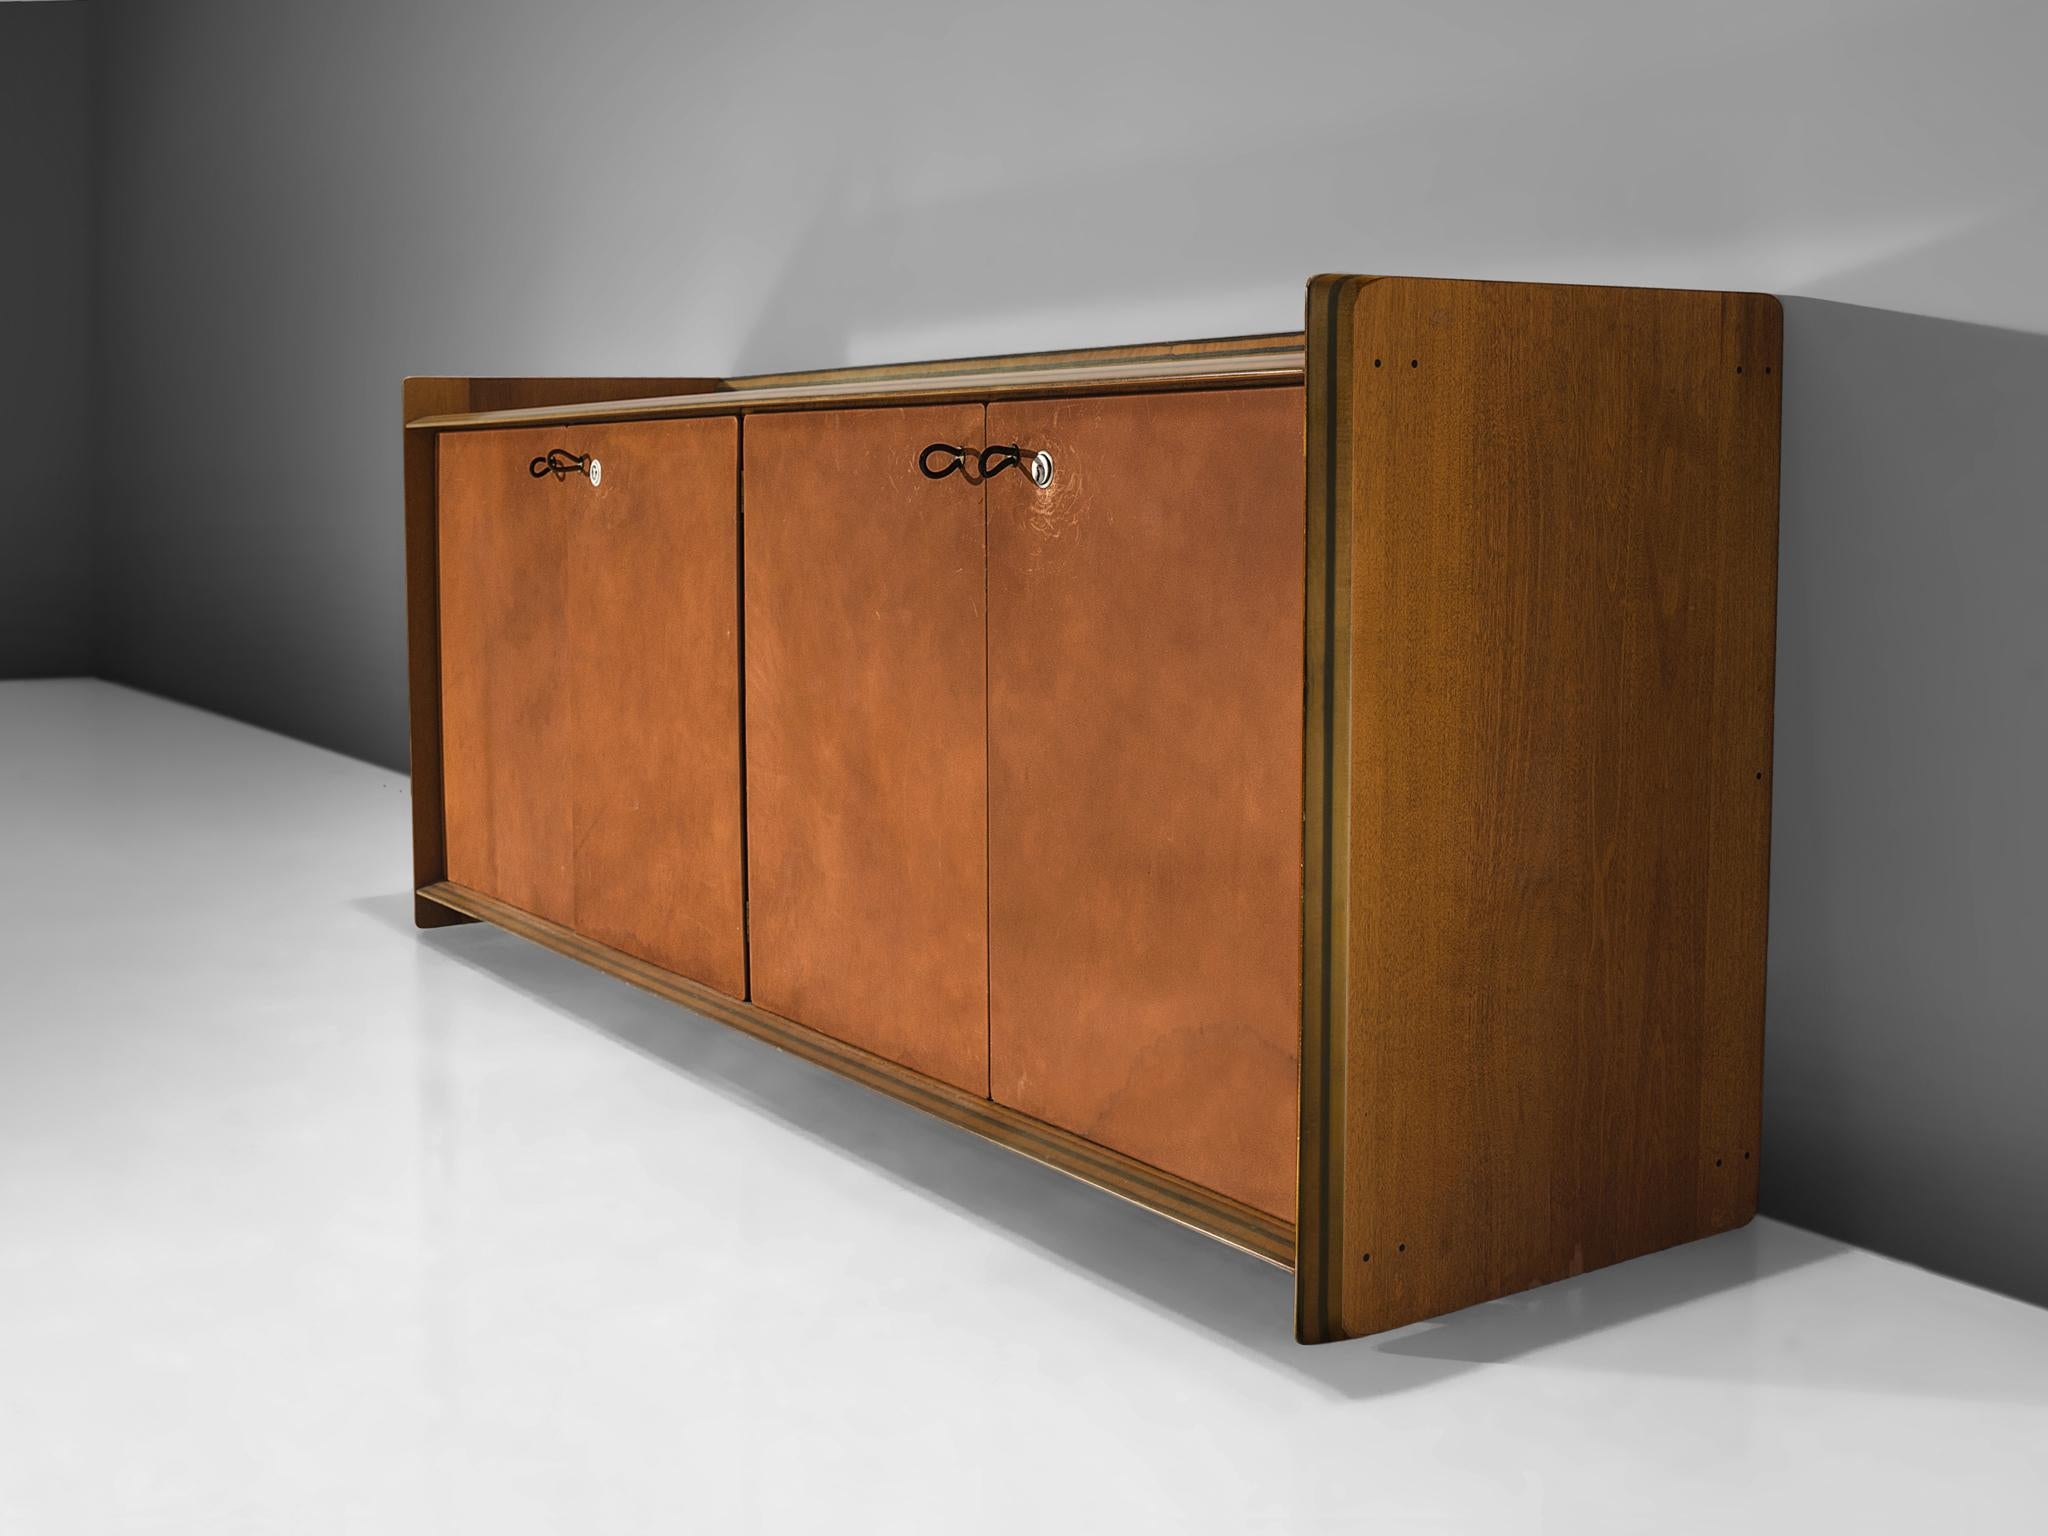 Afra & Tobia Scarpa, sideboard model 'Artona', walnut, leather, Italy, circa 1975

This sideboard with leather front is designed as part of the Artona line by The Artona line by the Scarpa duo was in fact the first line ever produced by Maxalto,